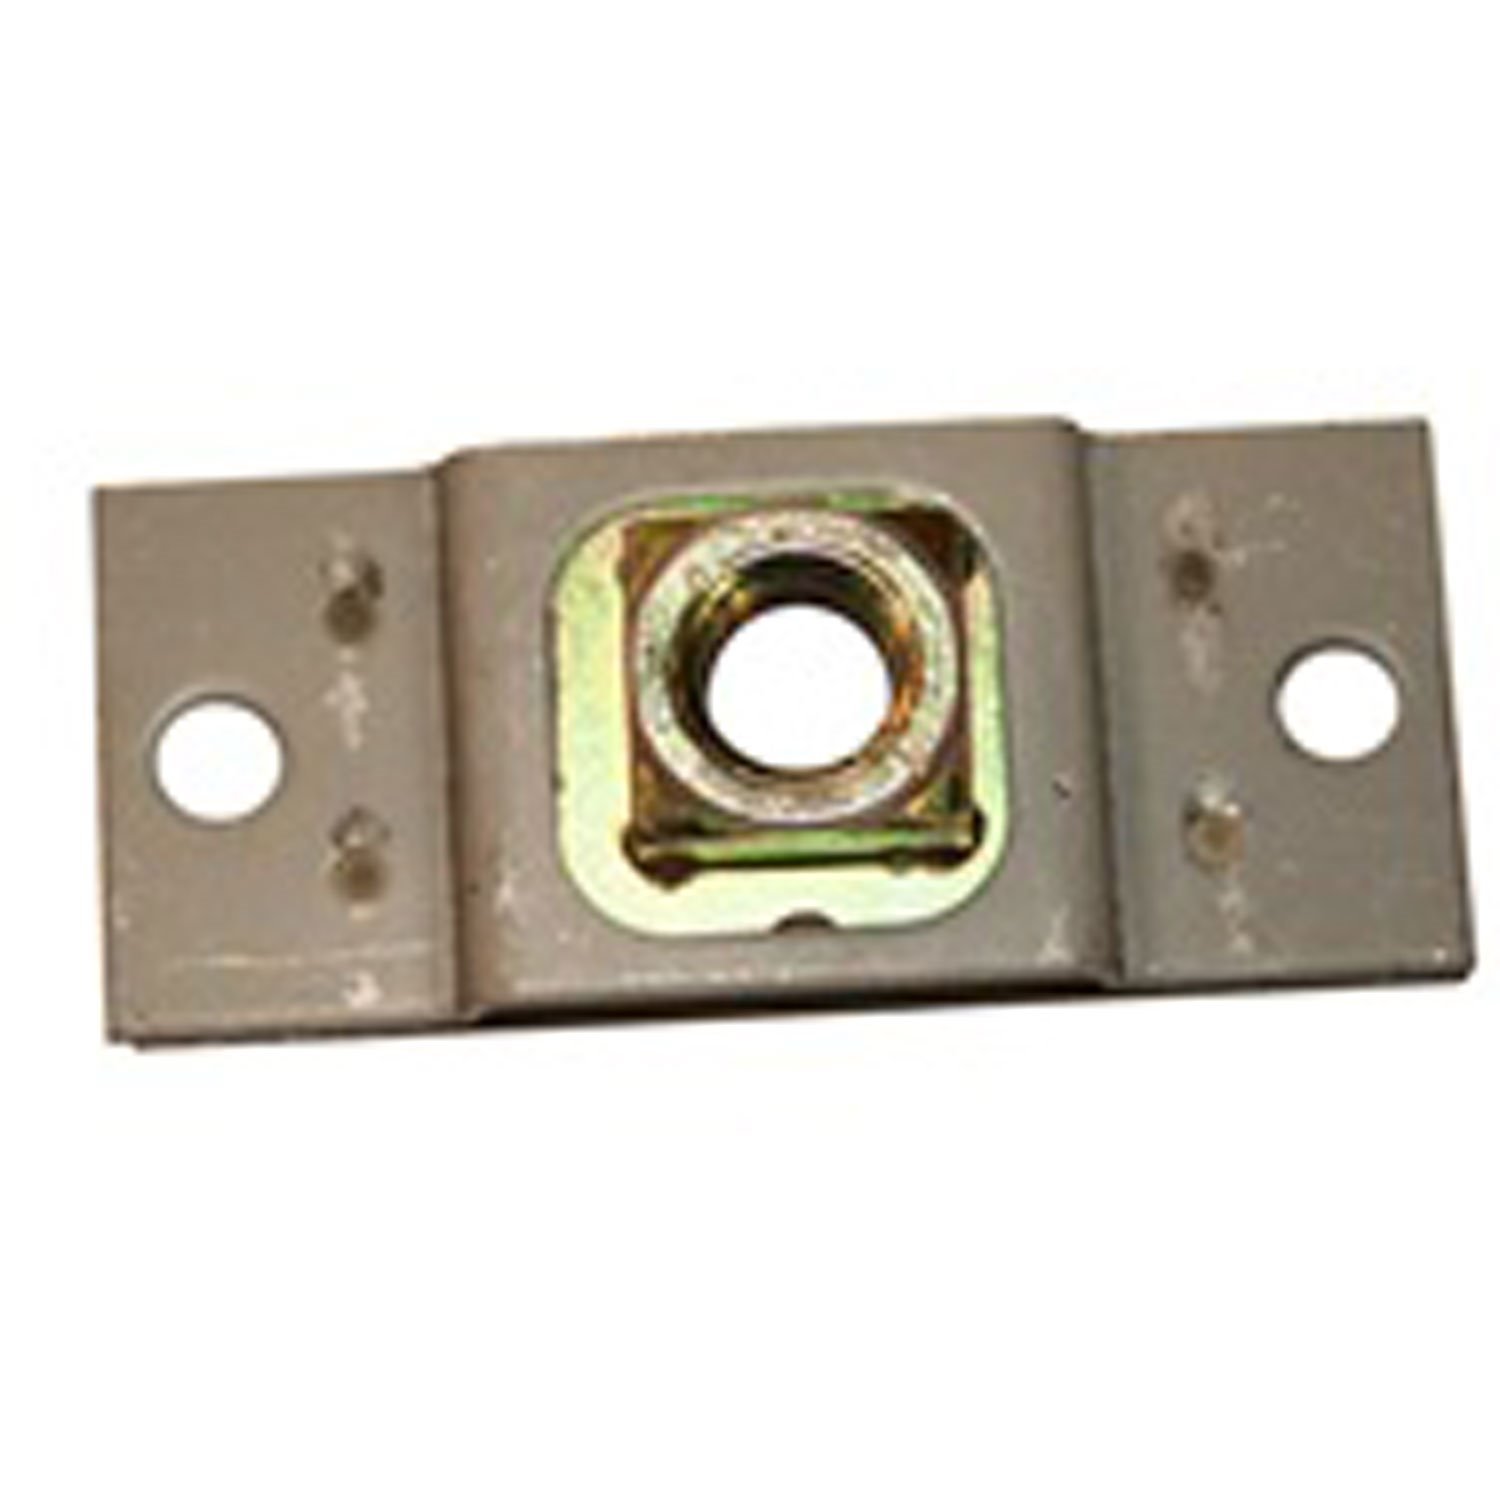 This door latch striker plate from Omix-ADA fits the left or right side on 81-86 Jeep CJ7 and CJ8 an